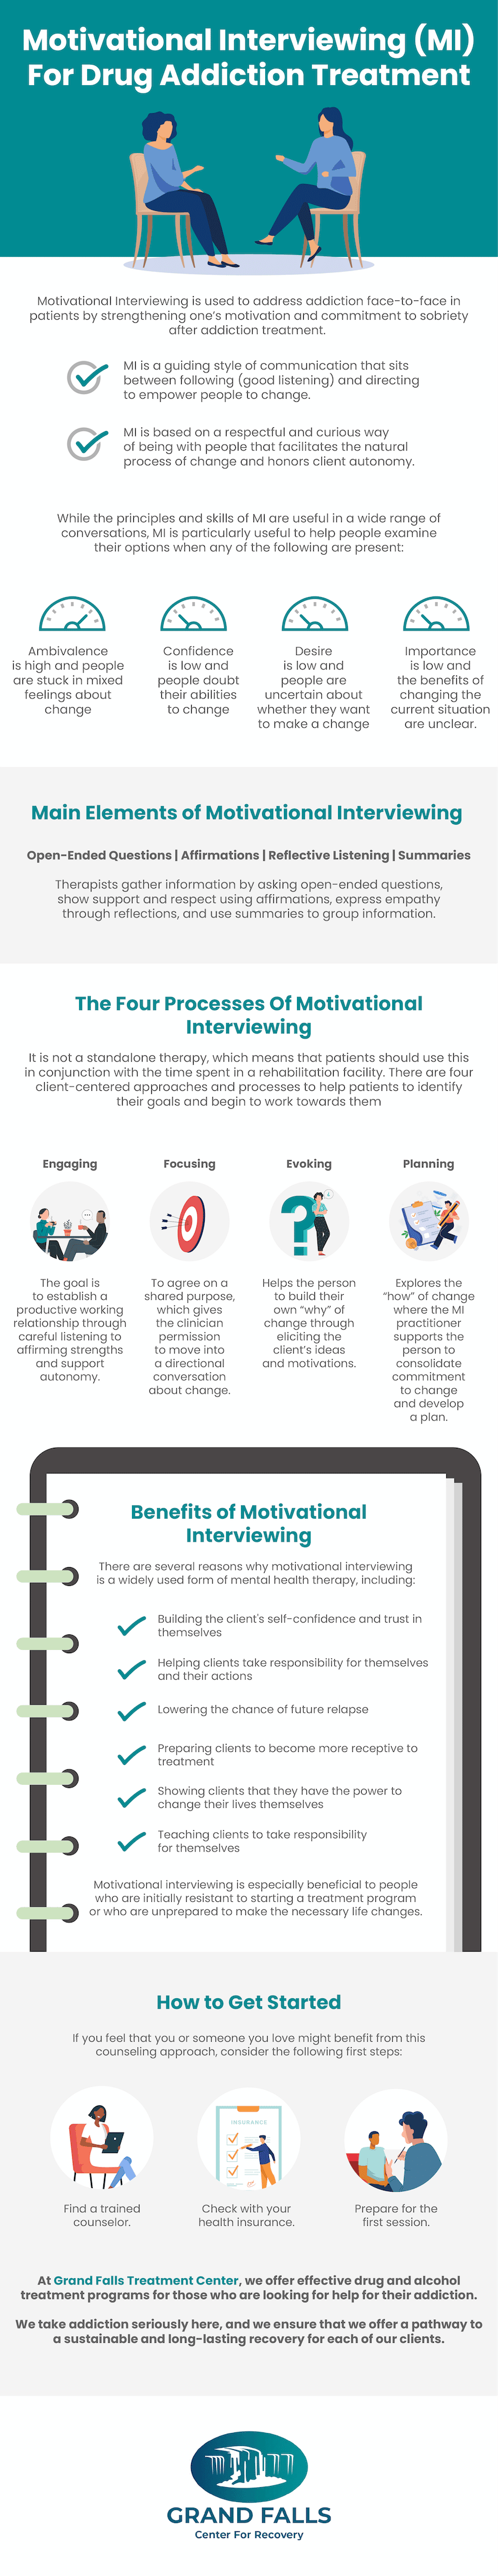 Motivational Interviewing MI For Drug Addiction Treatment Infographic 800